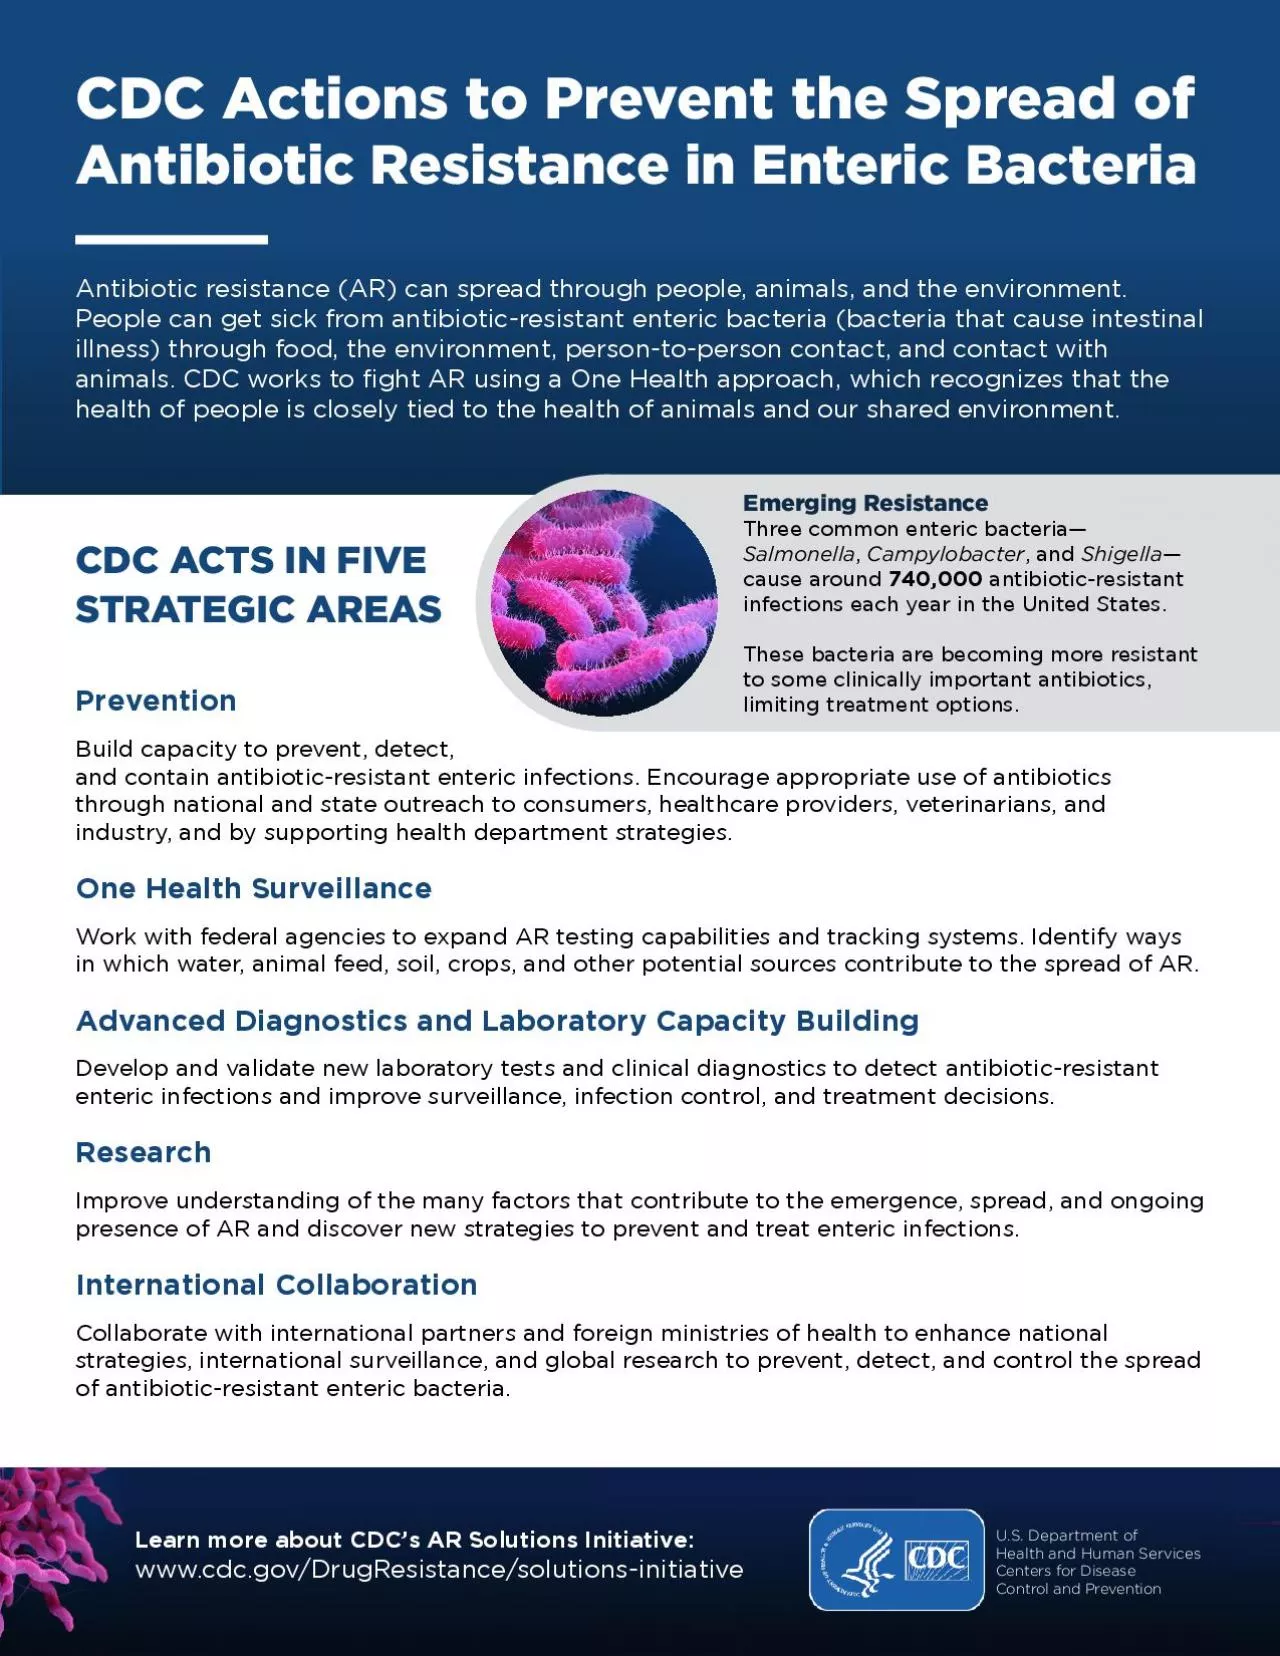 CDC Actions to Prevent the Spread of Antibiotic Resistance in Enteric